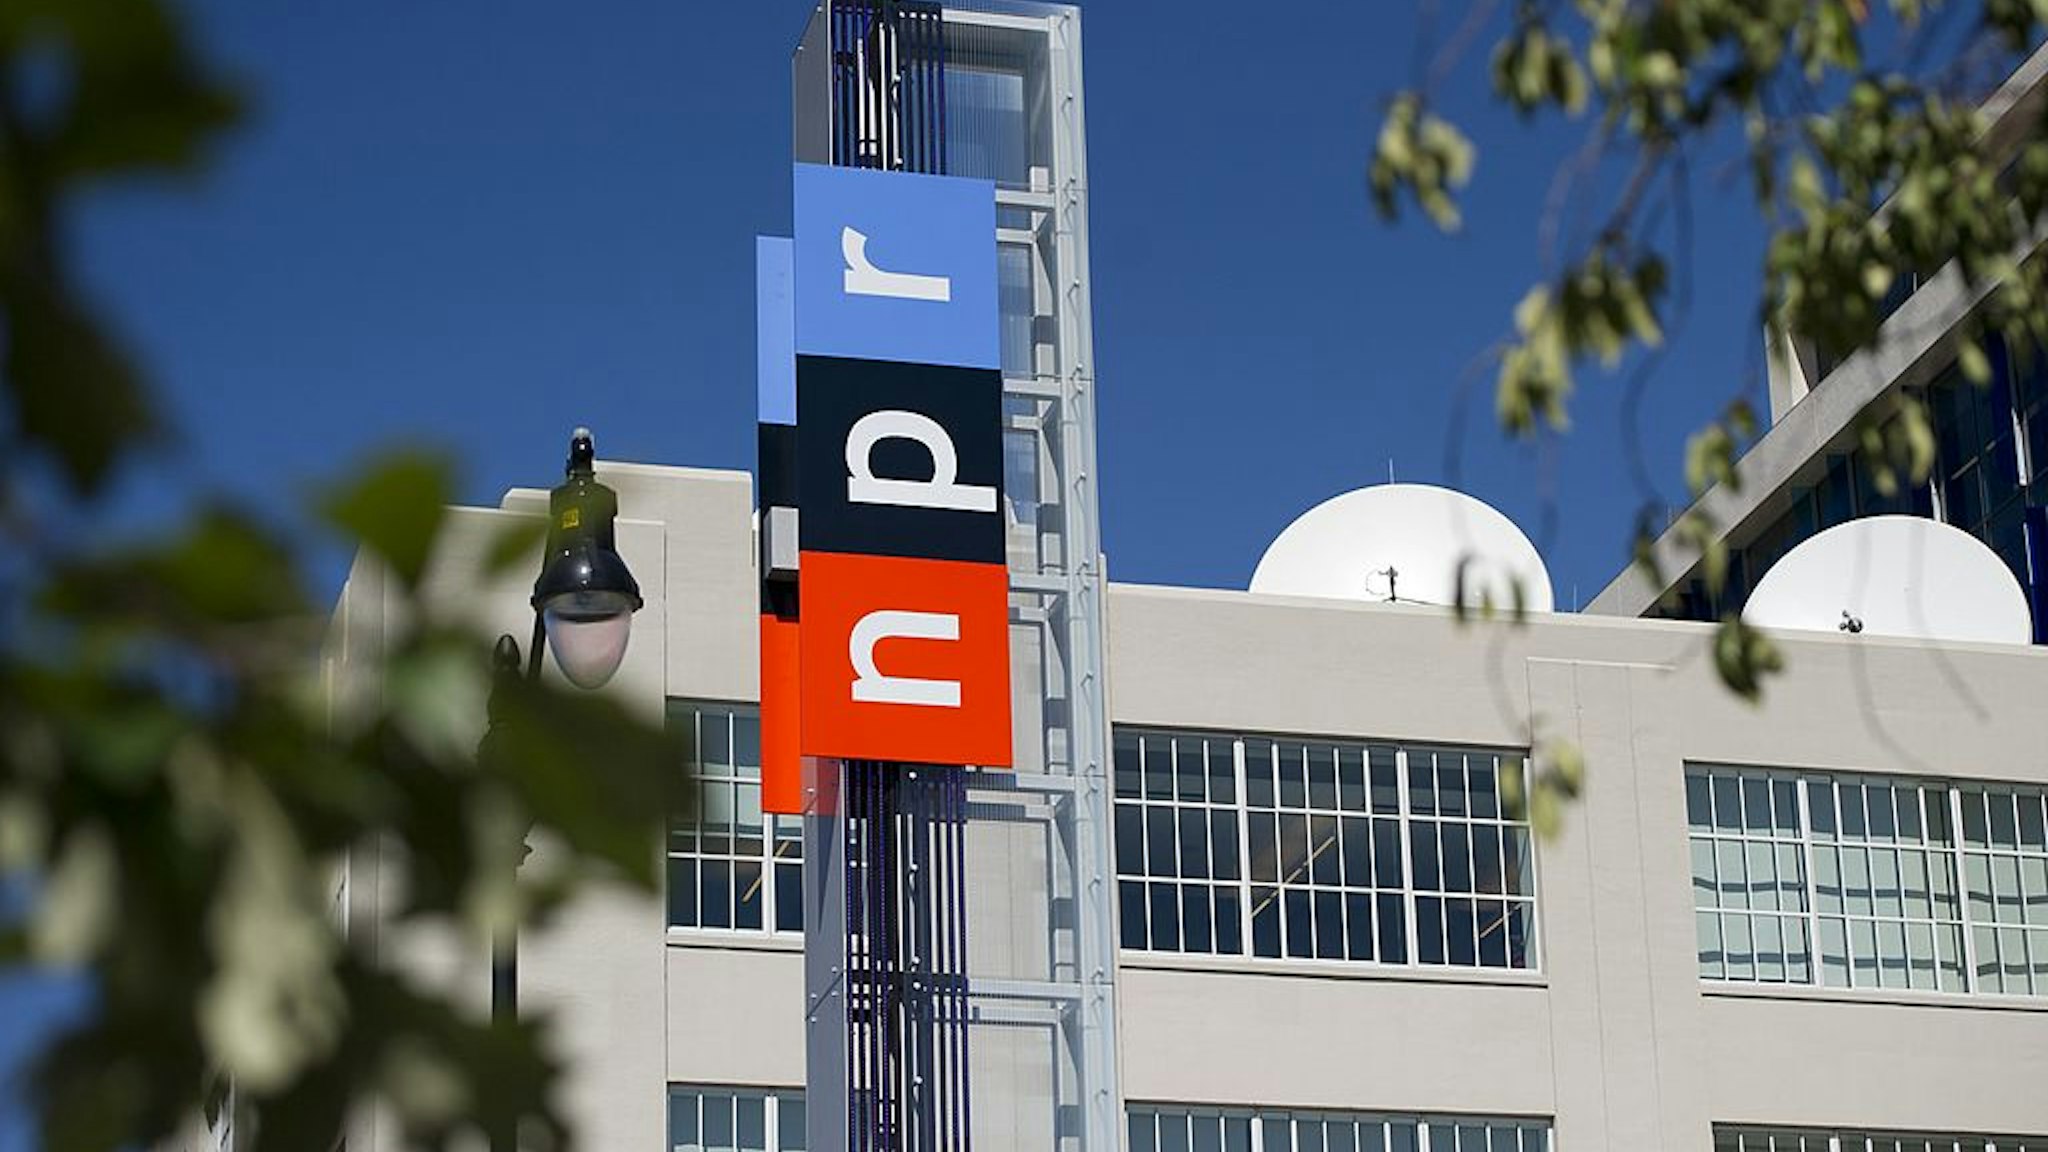 The headquarters for National Public Radio, or NPR, are seen in Washington, DC, September 17, 2013. The USD 201 million building, which opened in 2013, serves as the headquarters of the media organization that creates and distributes news, information and music programming to 975 independent radio stations throughout the US, reaching 26 million listeners each week. AFP PHOTO / Saul LOEB (Photo credit should read SAUL LOEB/AFP via Getty Images)